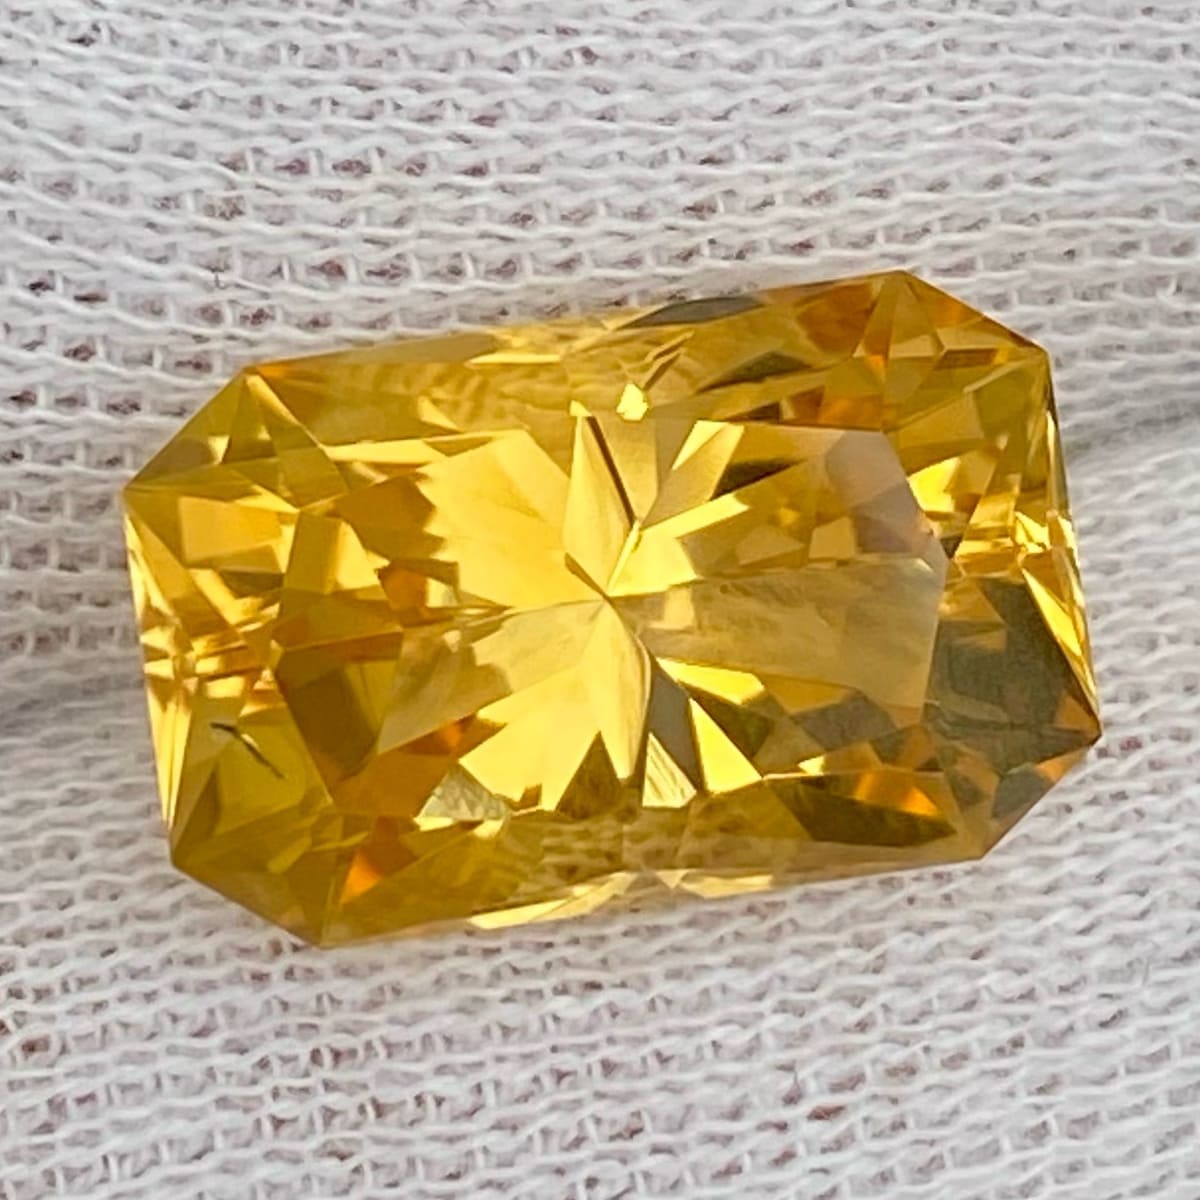 Faceted Dreamy Golden Citrine